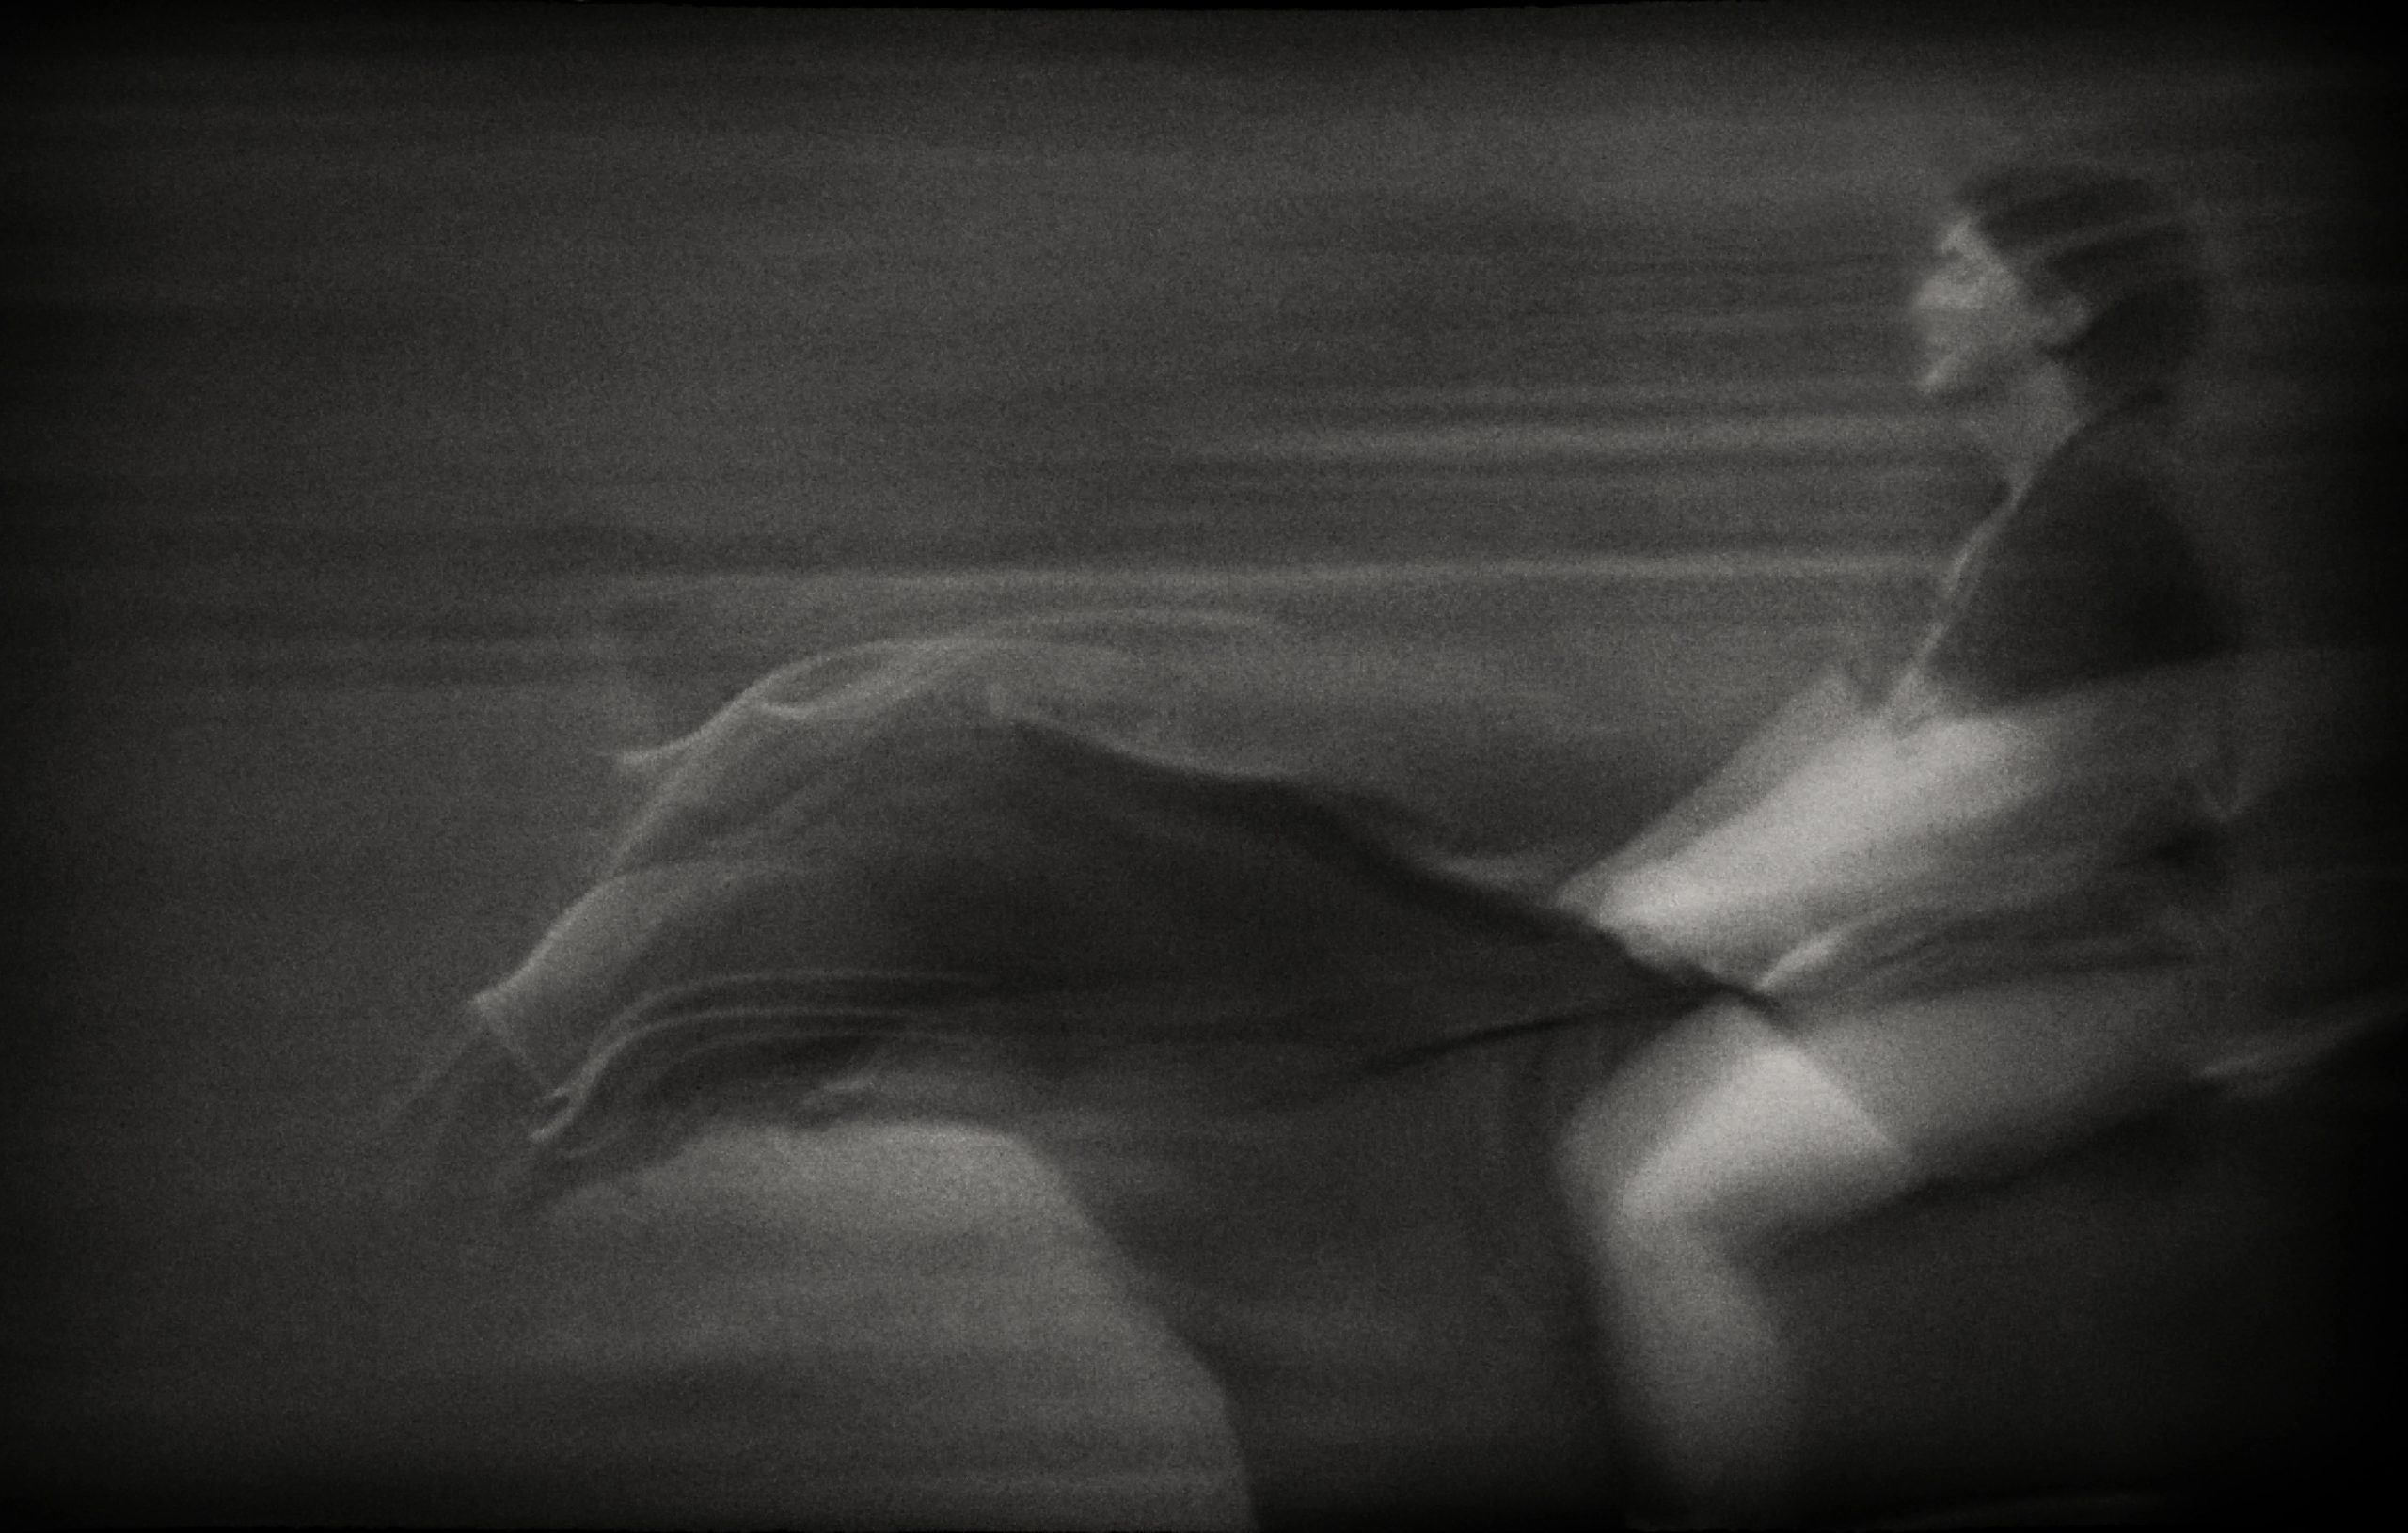 close up of a thoroughbred racehorse and rider during a training session. Captured on film with "in Camera" movement